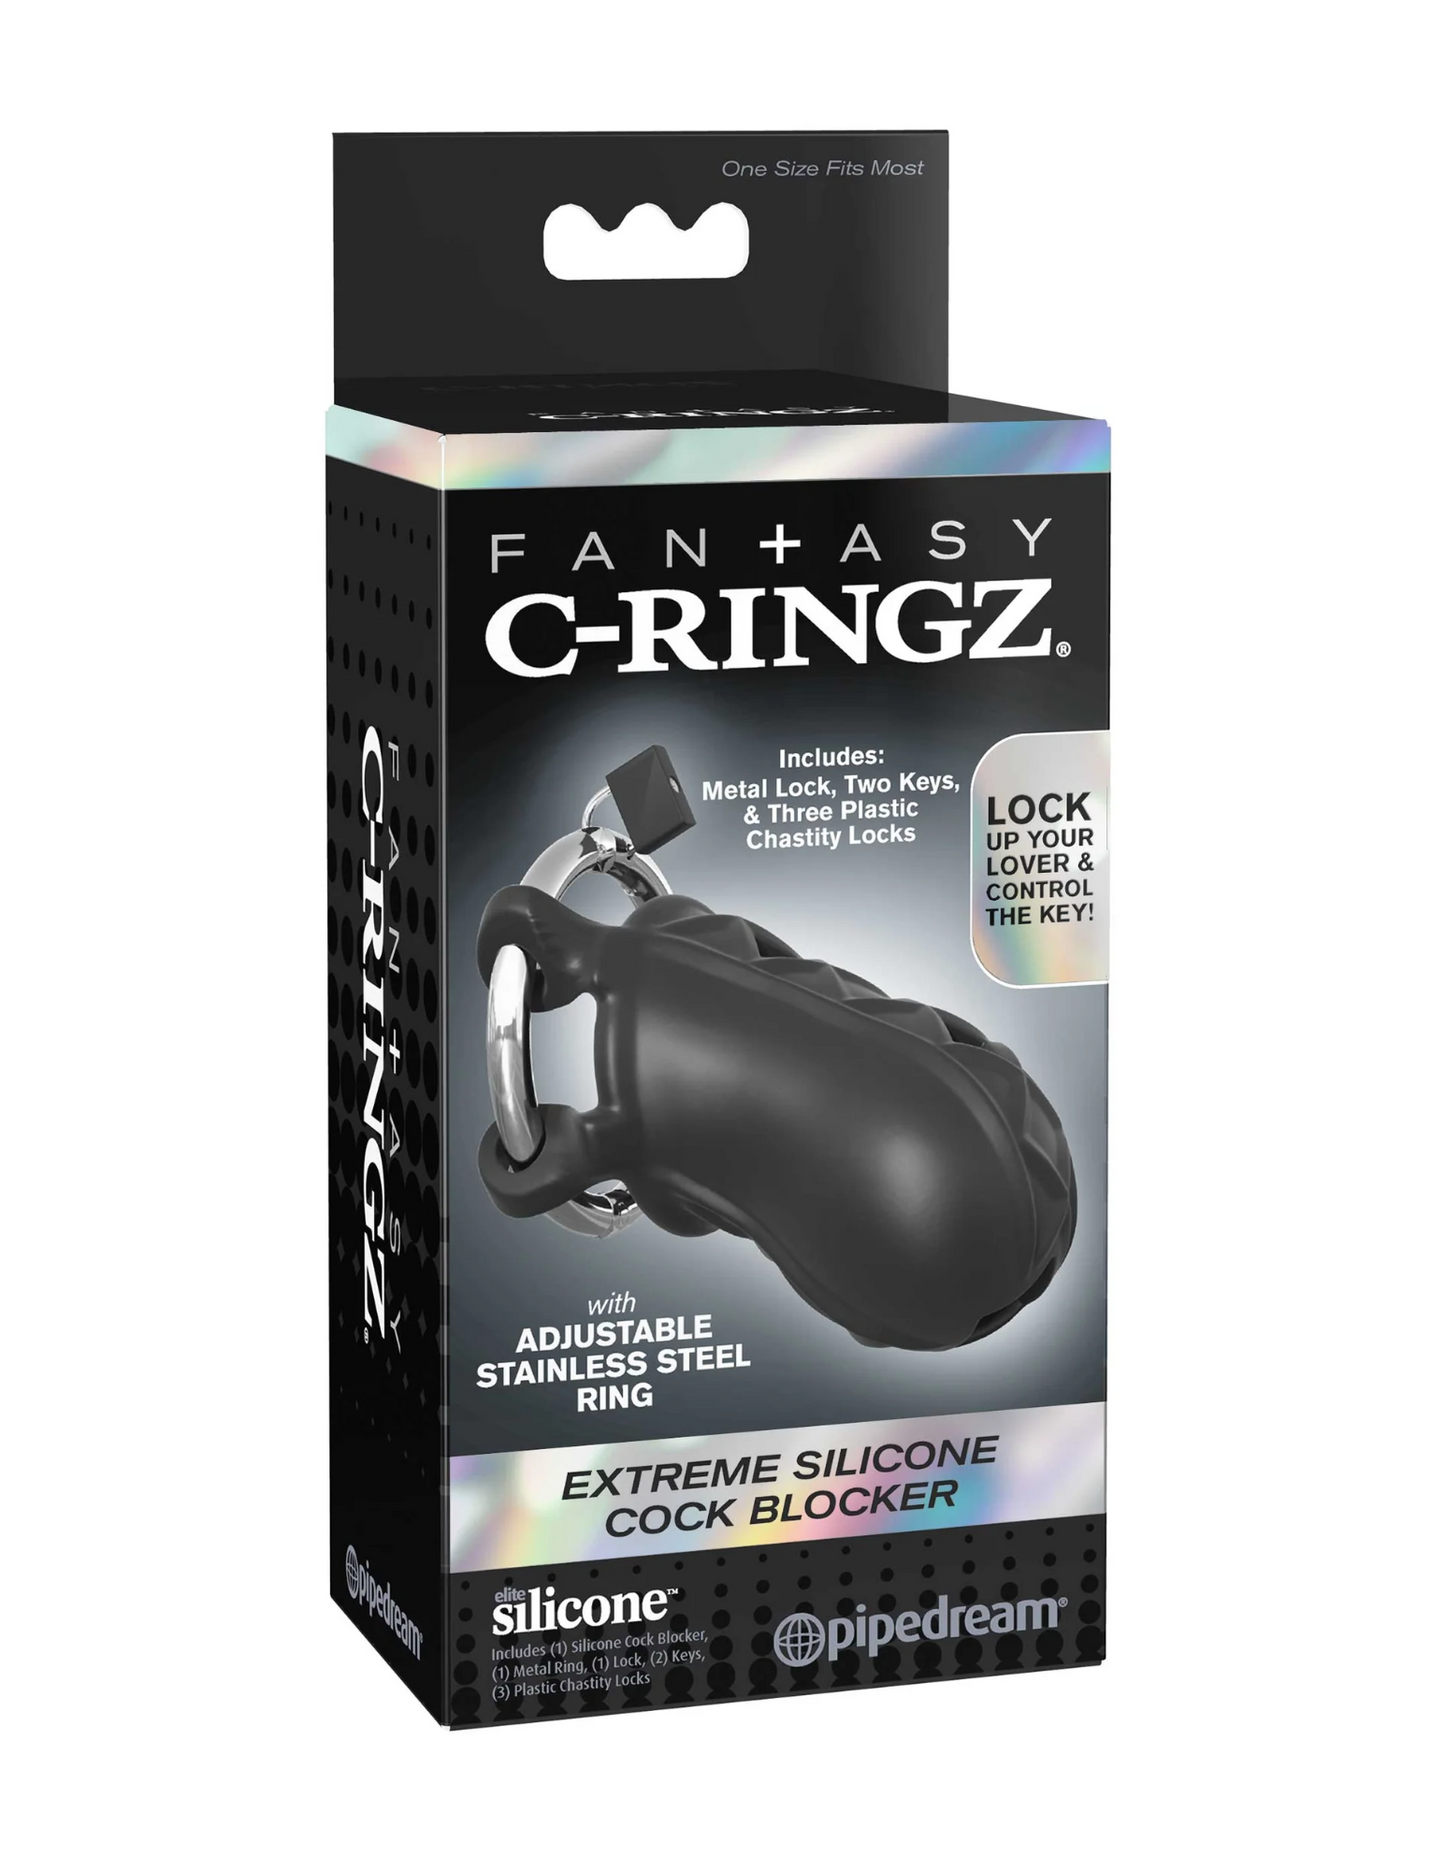 Photo of the front of the box for the Fantasy C-Ringz Extreme Silicone Cock Blocker from Pipedreams (black).